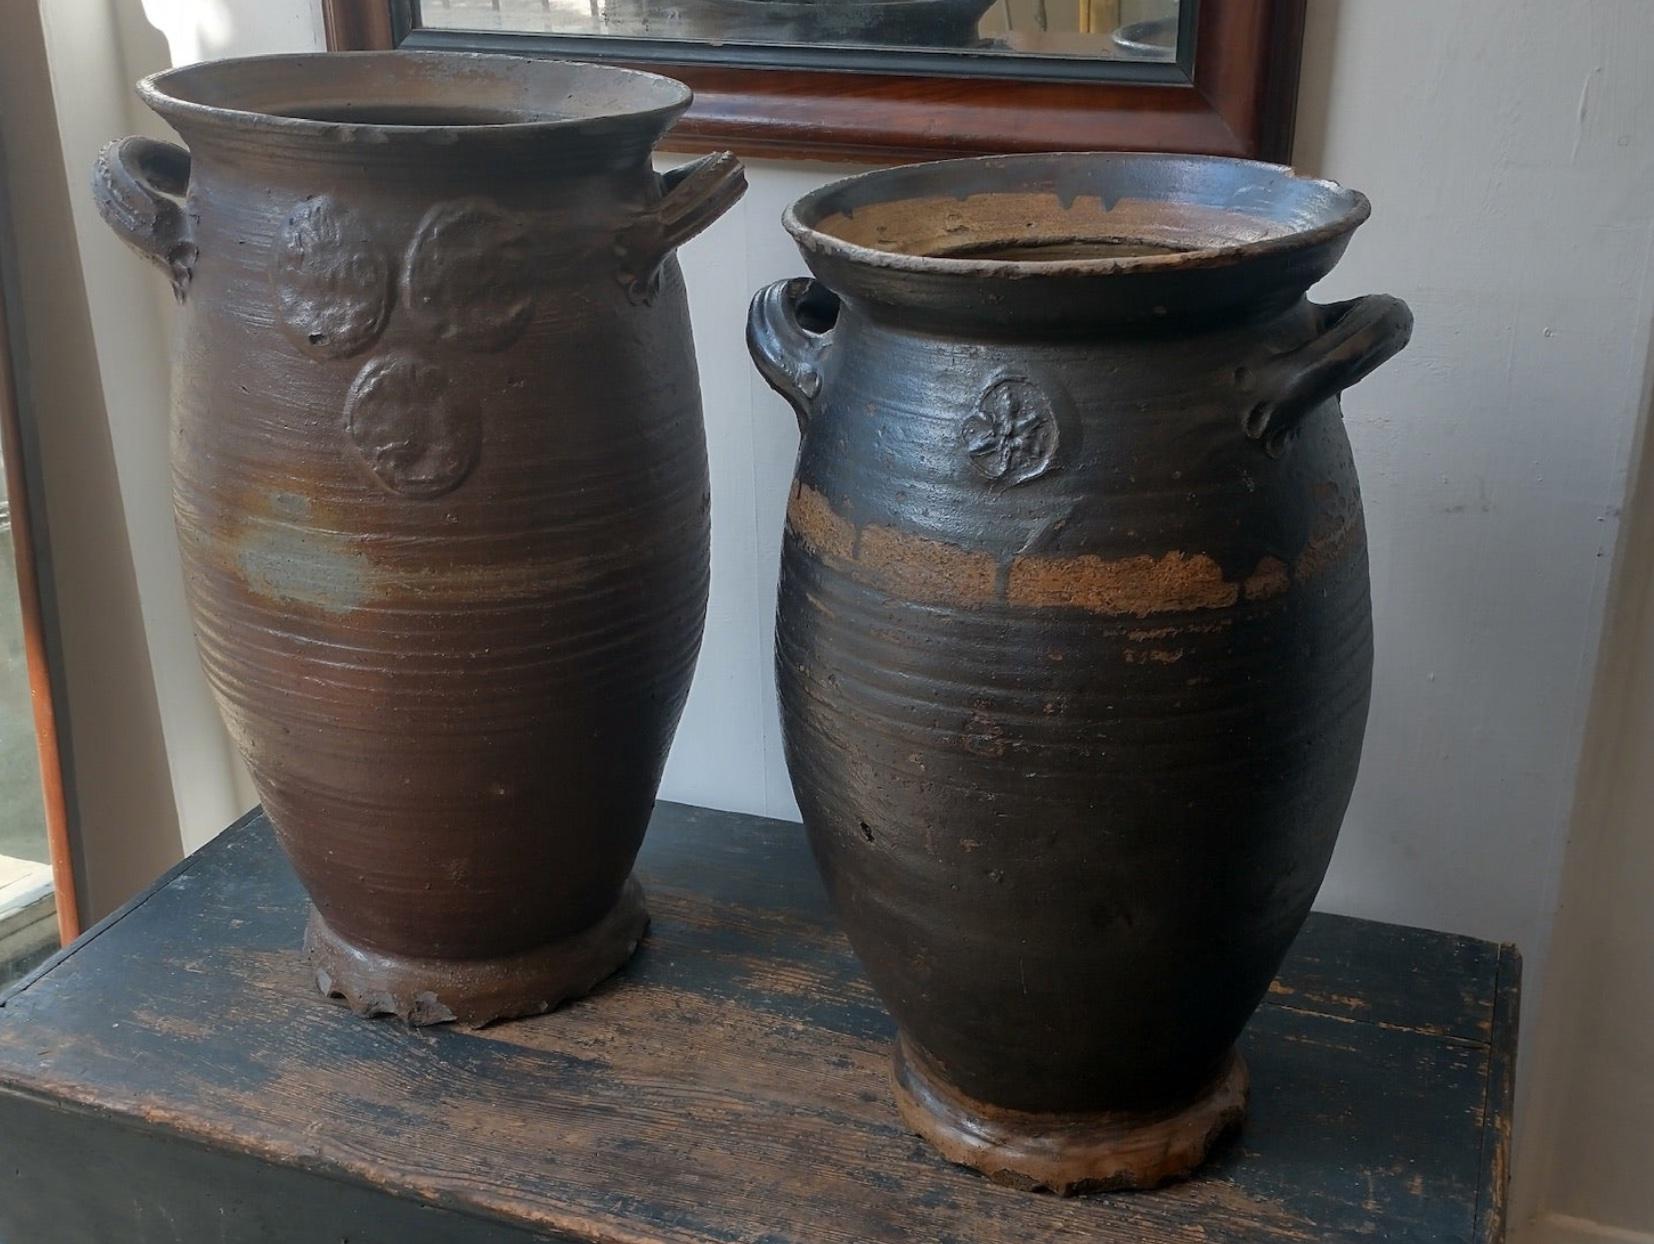 Pair of large 19th century stoneware pots with dark brown semi-matte glaze, two petit carrying handles, and maker's embossed insignia. 

Germany, circa 1870

Dimensions: 22W x 16D x 15H